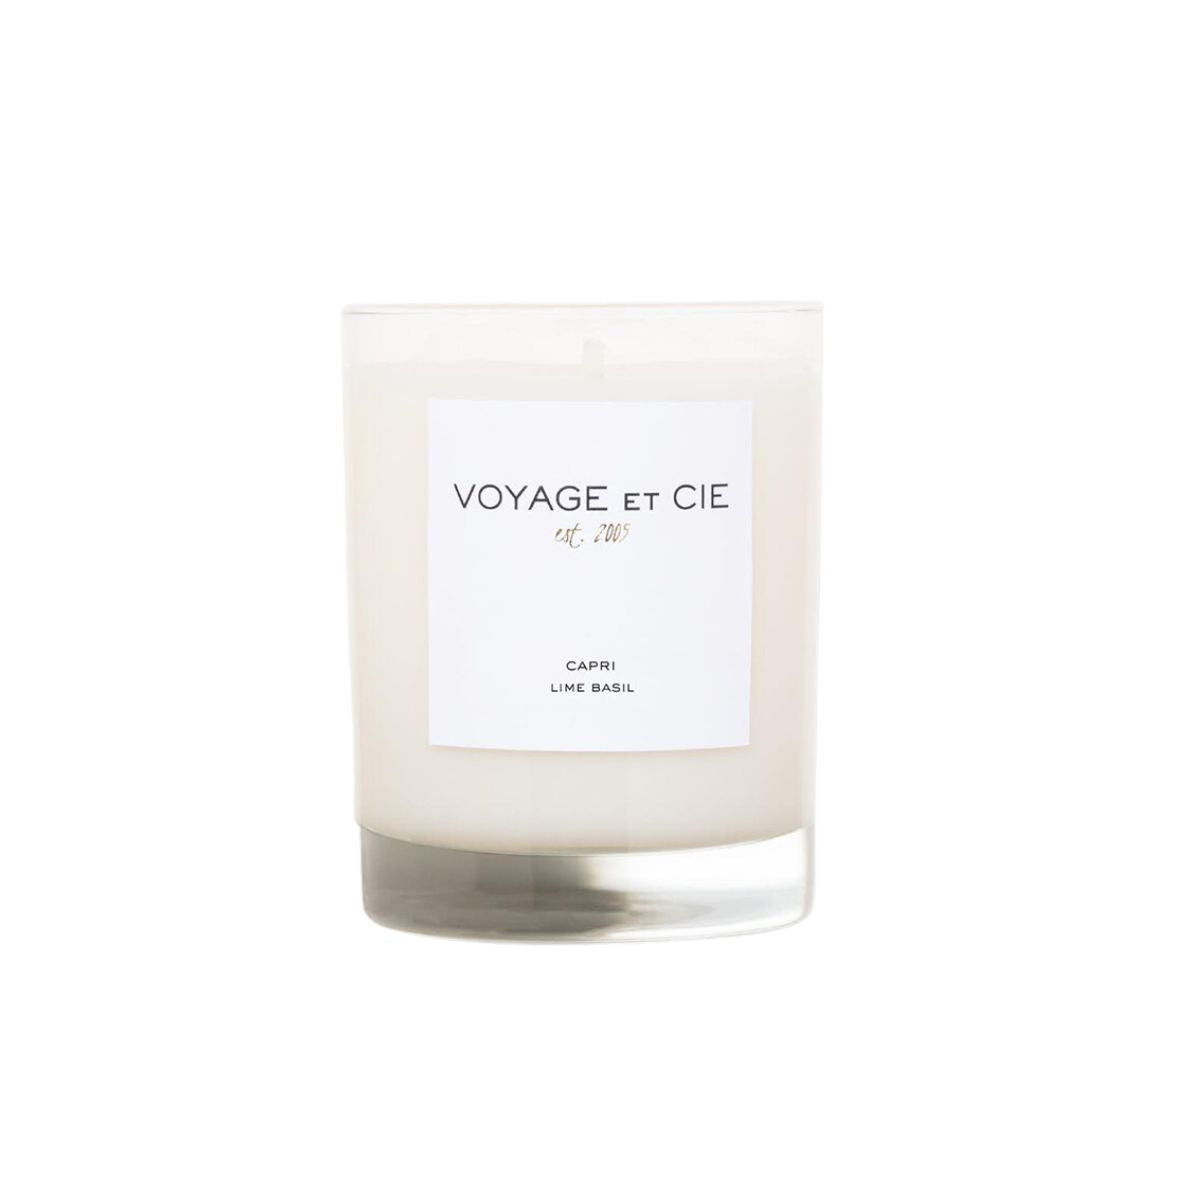 Voyage Et Cie Classic Highball Candle in Black Box in Capri Lime Basil